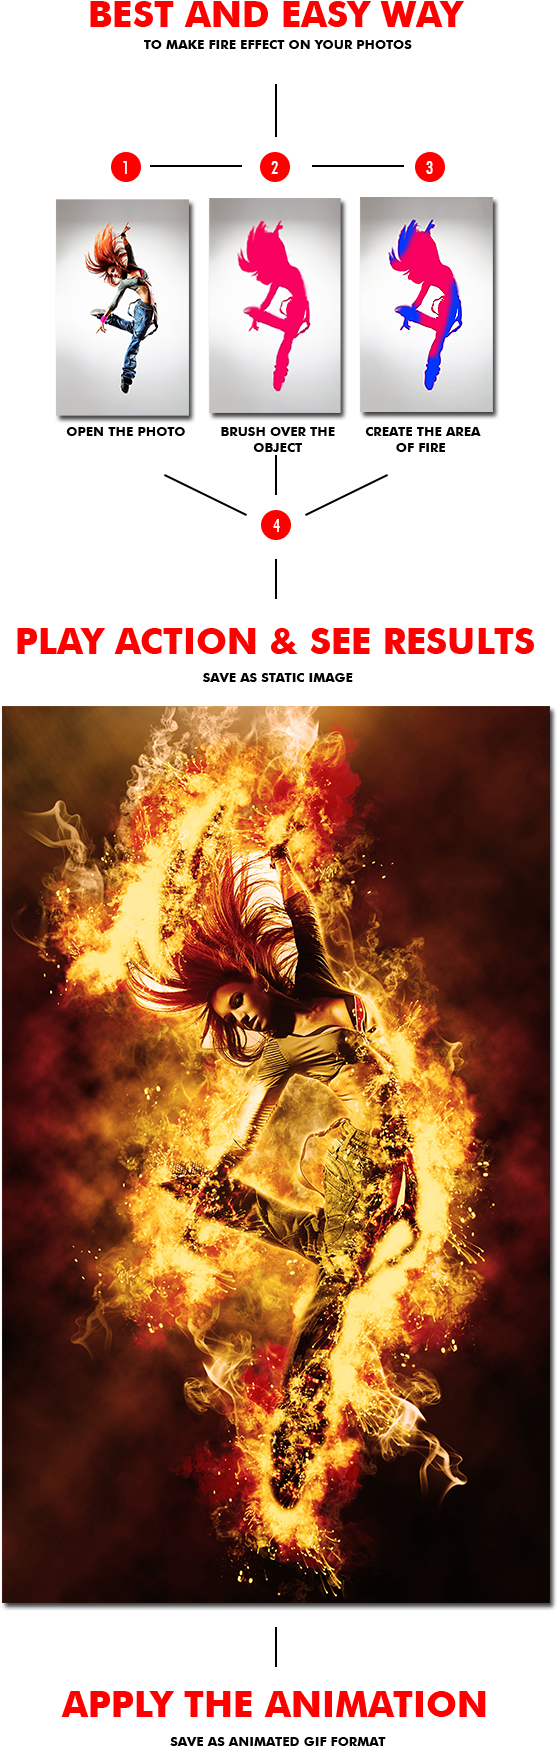 Gif Animated Fire Photoshop Action - Poster (590x1780), Png Download